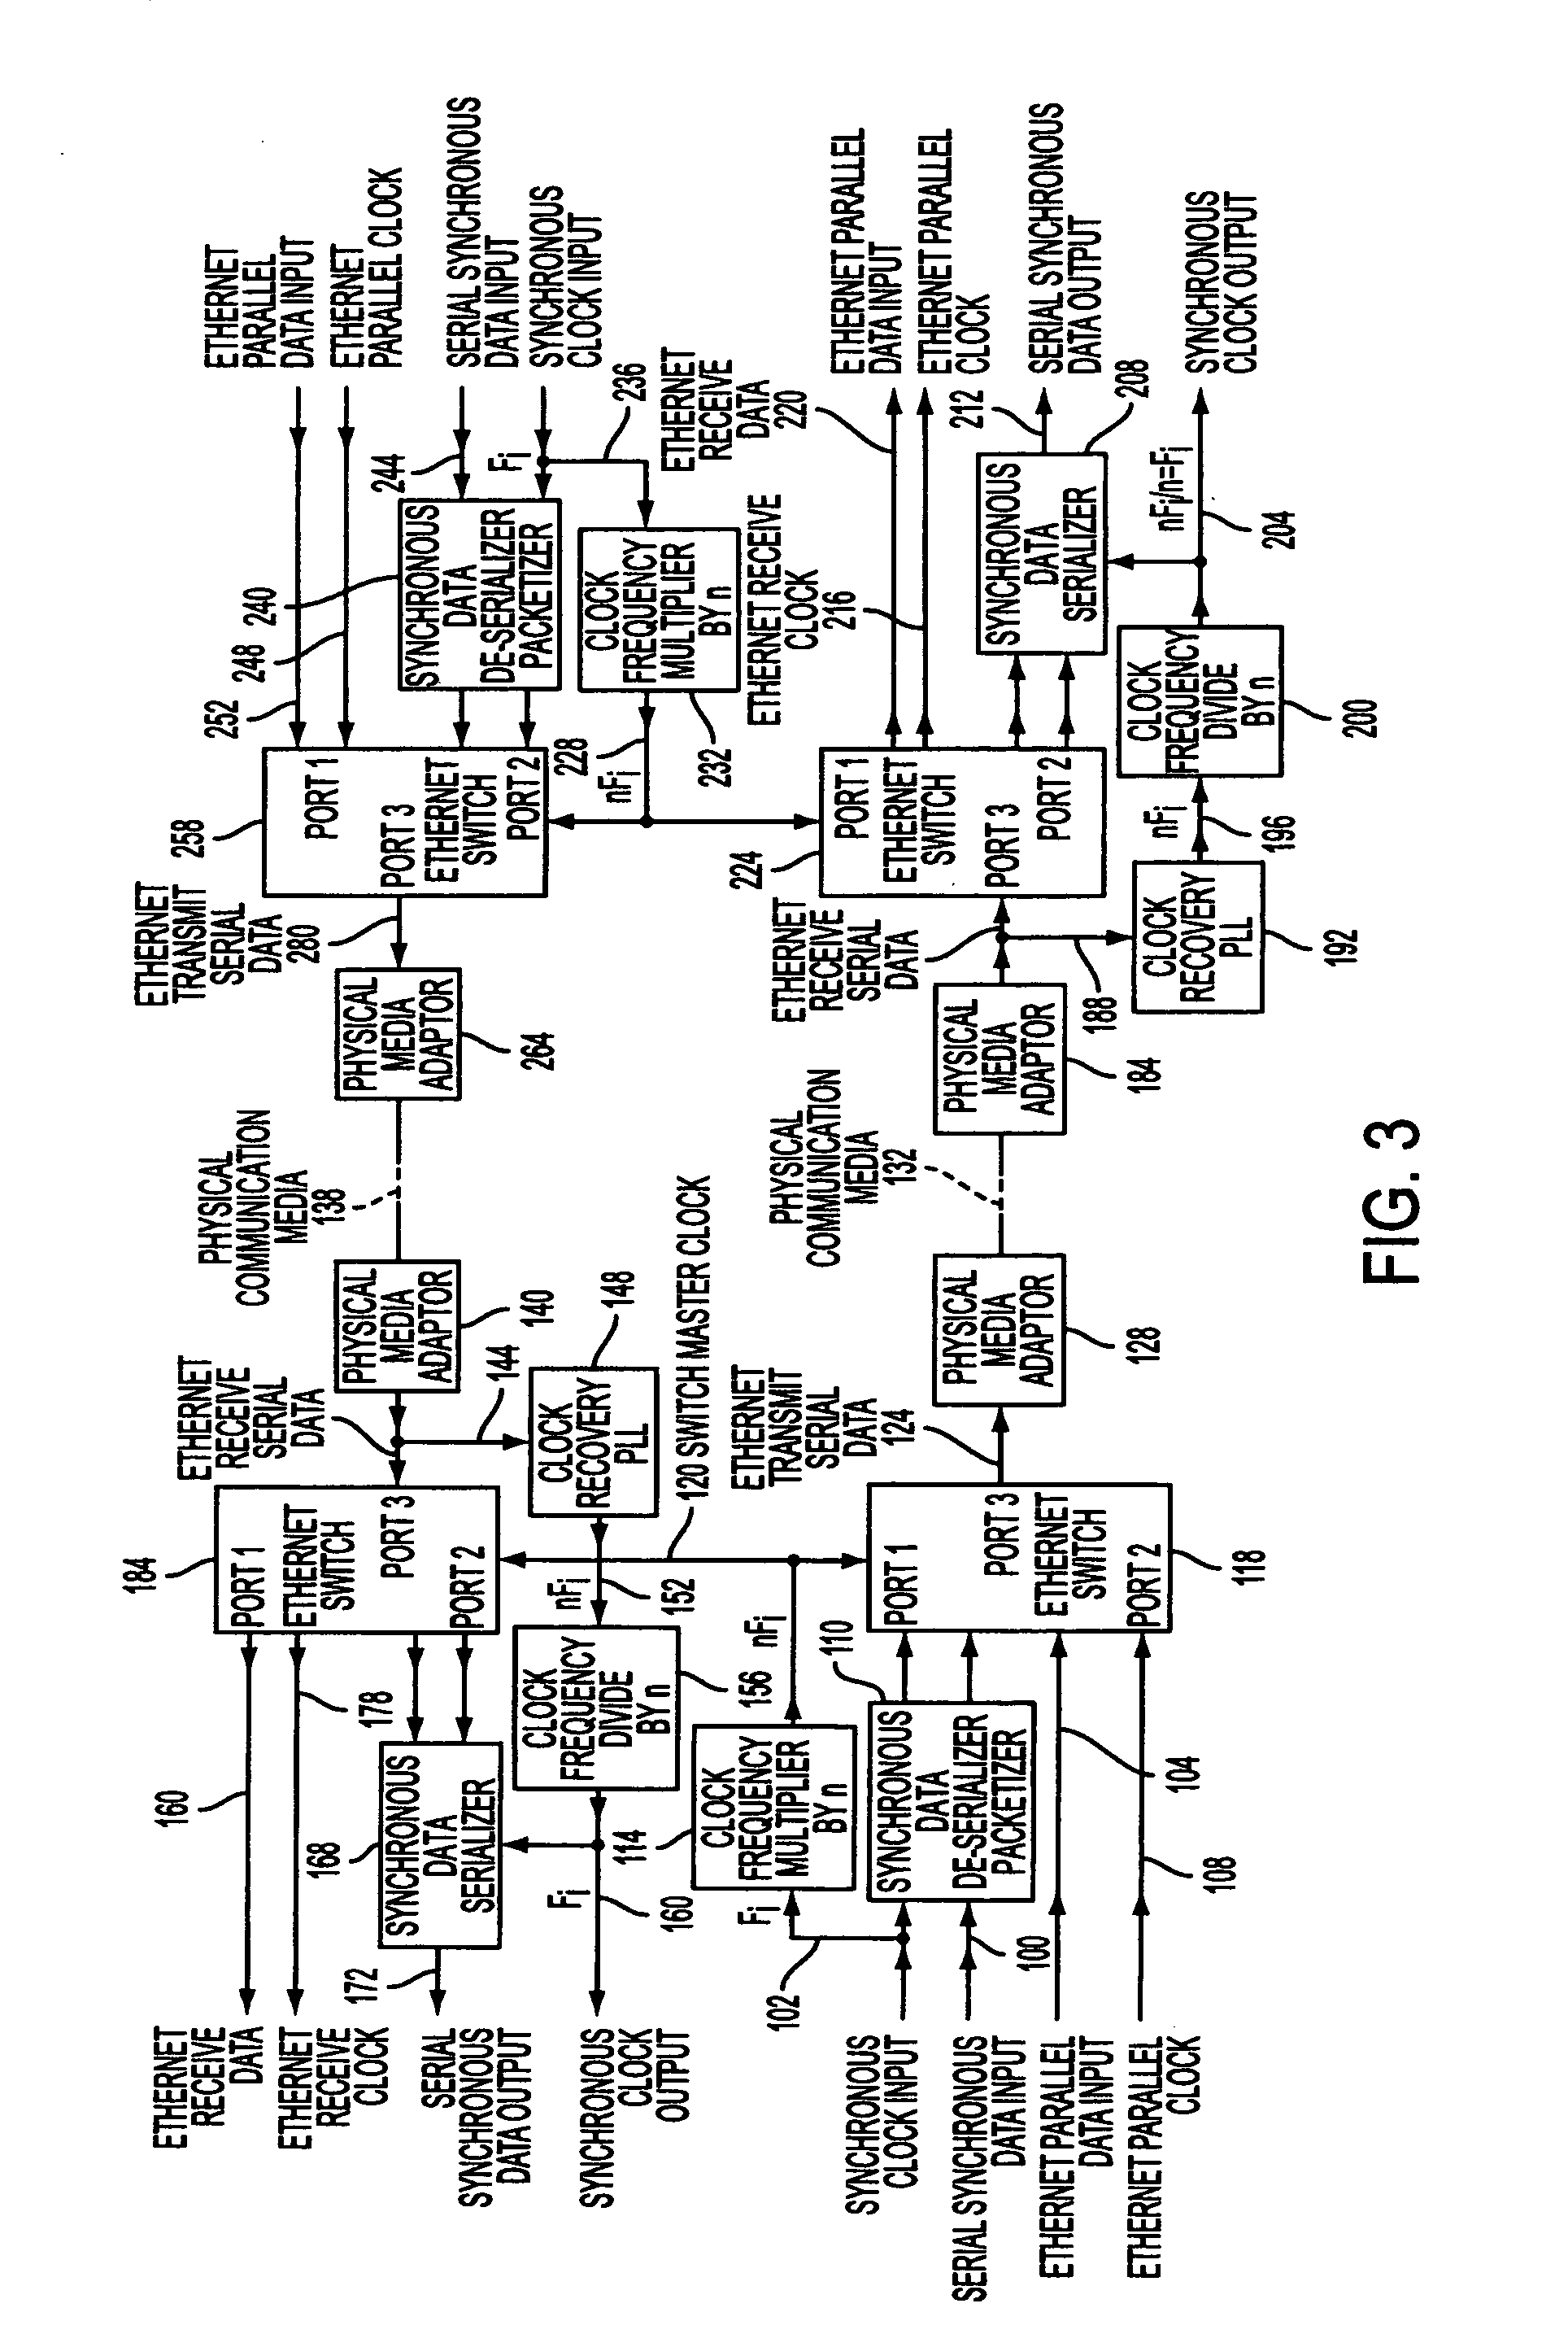 Apparatus and methods for providing synchronous digital data transfer over an ethernet